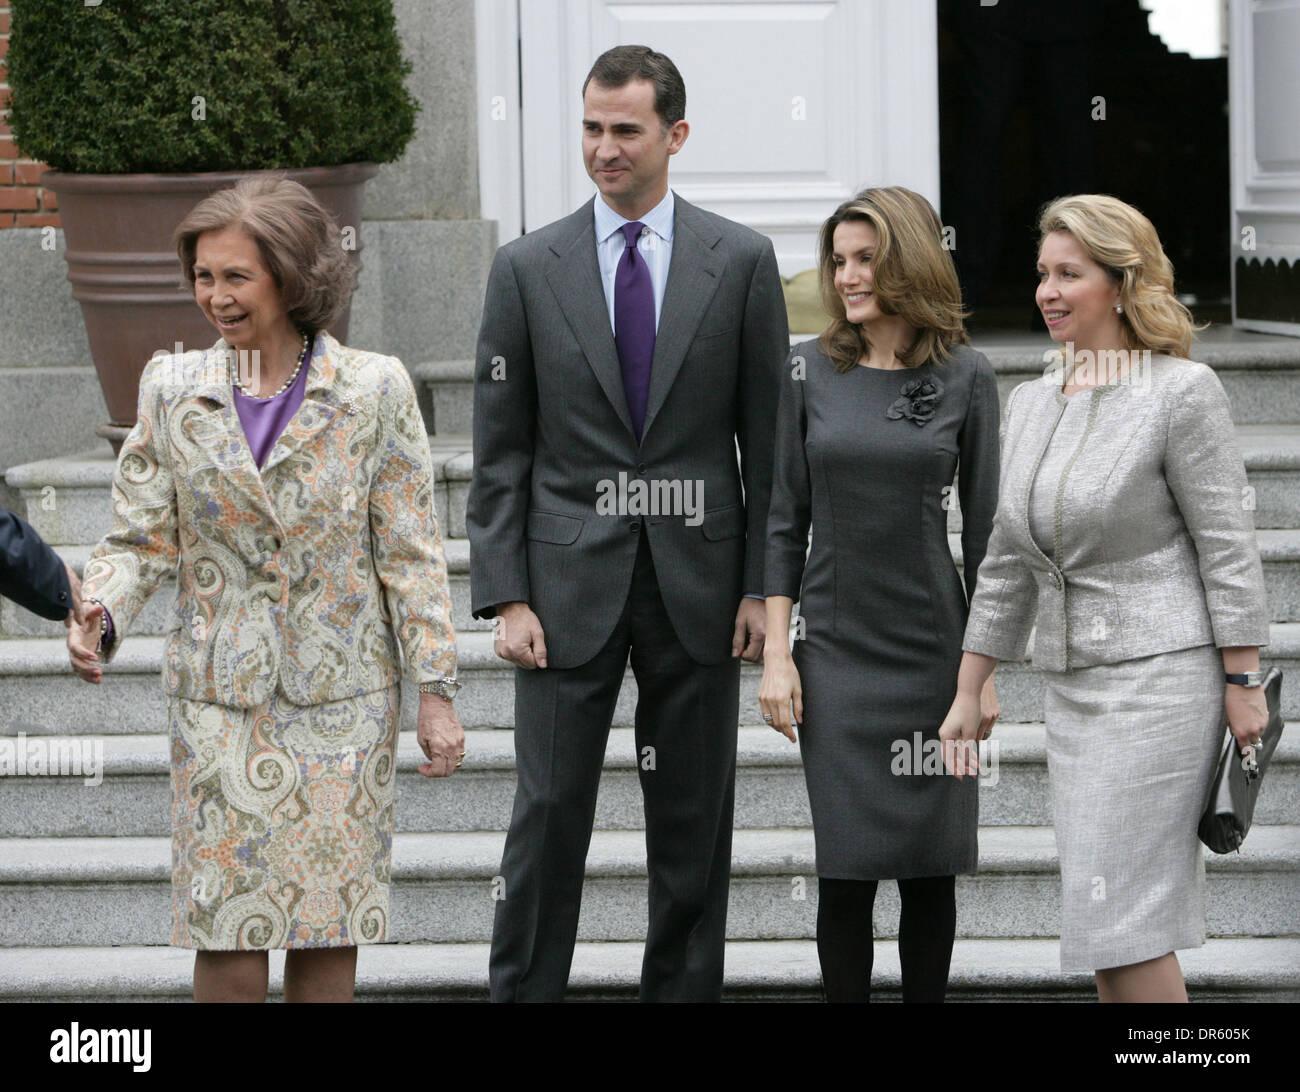 Mar 02, 2009 - Madrid, Spain - (L-R) QUEEN SOFIA, PRINCE FELIPE of Asturias, PRINCESS LETIZIA and SVETLANA MEDVEDEVA, meeting at the Zarzuela palace, the official residence of the King and Queen of Spain. (Credit Image: © PhotoXpress/ZUMA Press) RESTRICTIONS: * North and South America Rights Only * Stock Photo